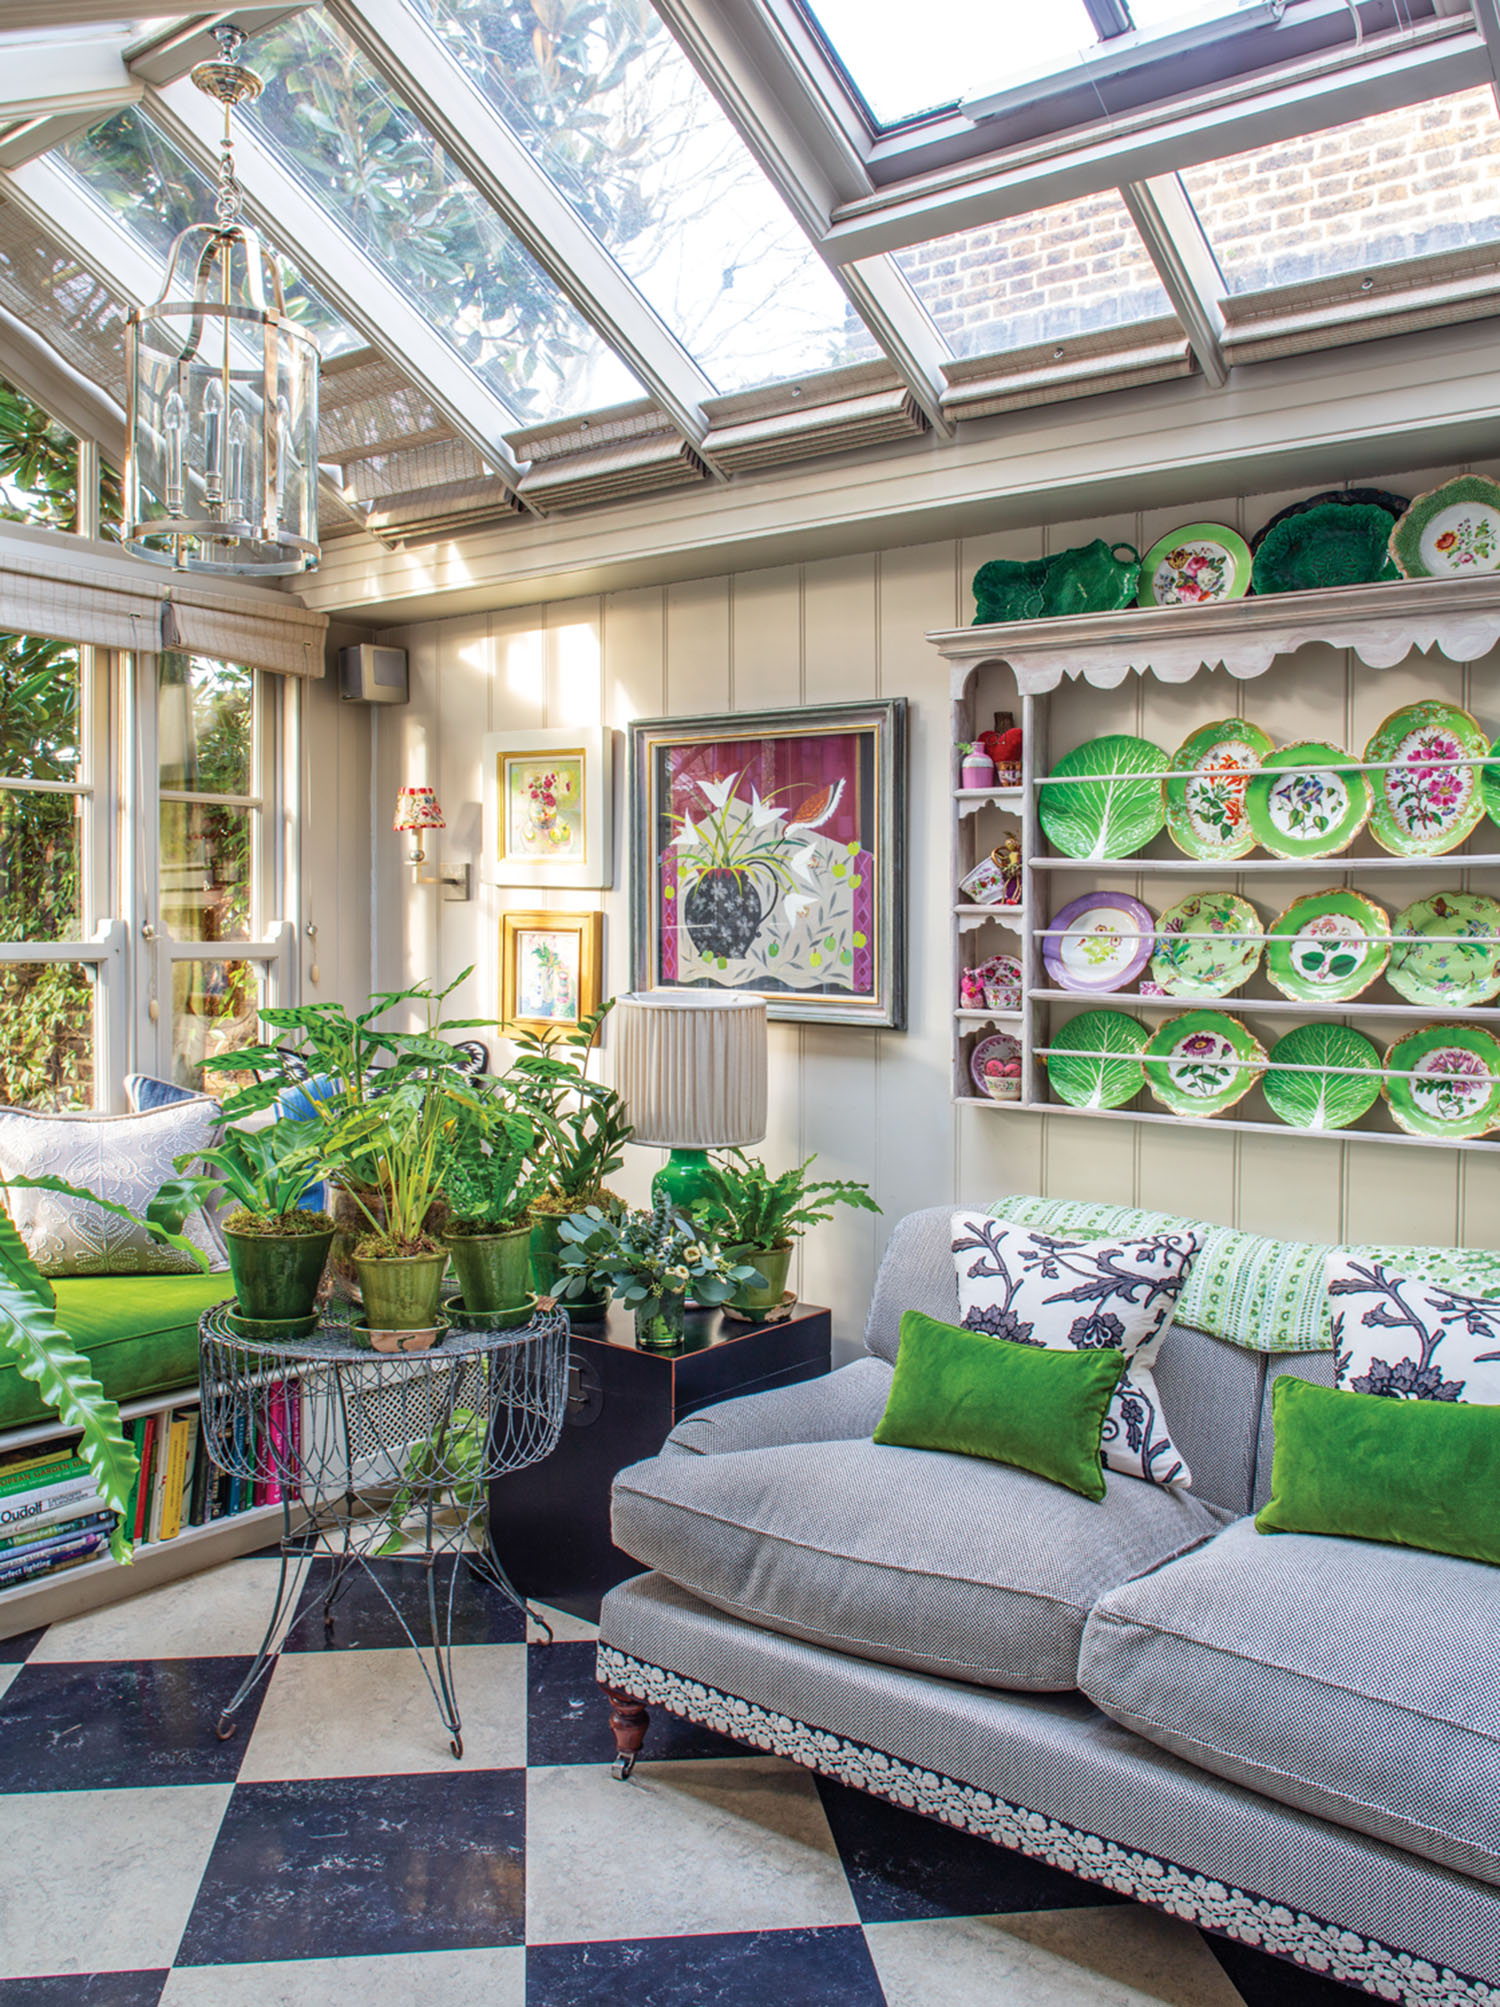 BUTTER WAKEFIELD HOUSE, LONDON: CHRISTMAS - THE GARDEN ROOM. GLASS CONSERVATORY JUST OFF THE KITCHEN WITH SOFA AND BUTTER'S CHINA PLATES DISPLAYED ON PLATE RACK. FERNS